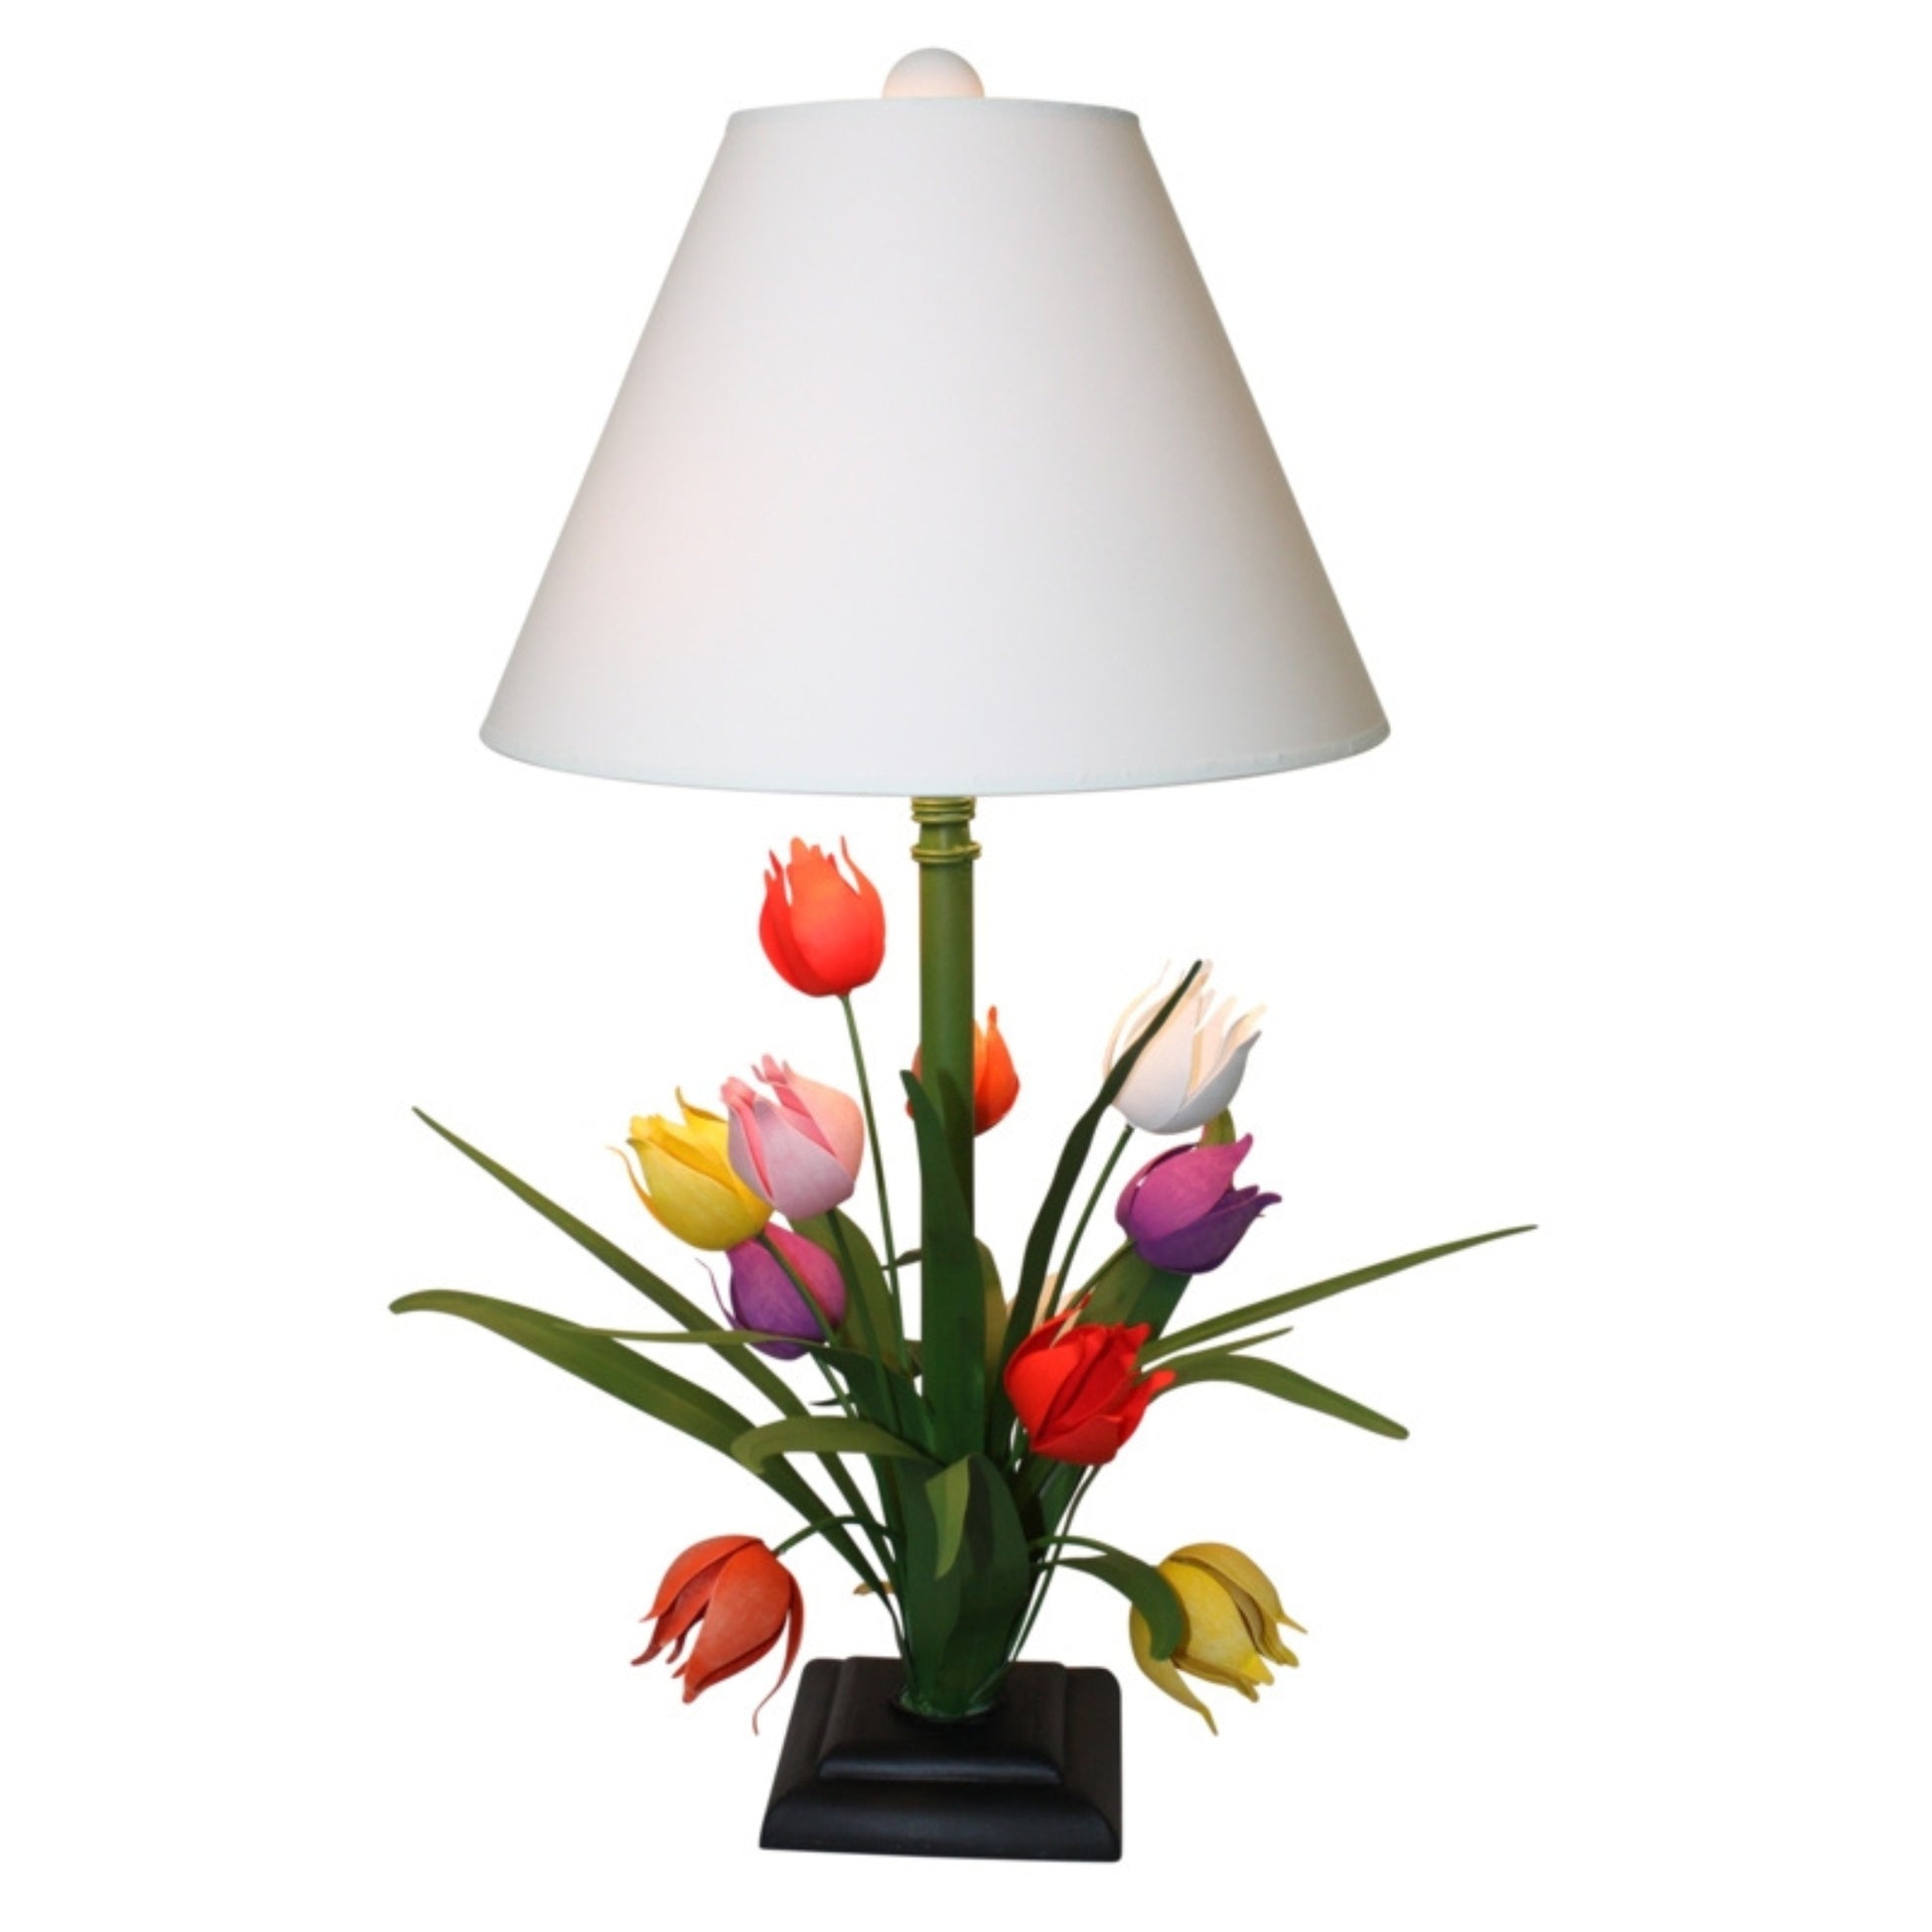 Hand Painted Large Tabletop Iron & Tole Tulip Flower Lamp with Ivory Lamp Shade - Carleton Varney Design (32"H) | Comes with 16" diameter Ivory Lamp Shade and Ball Finial as shown | INSIDE OUT | InsideOutCatalog.com